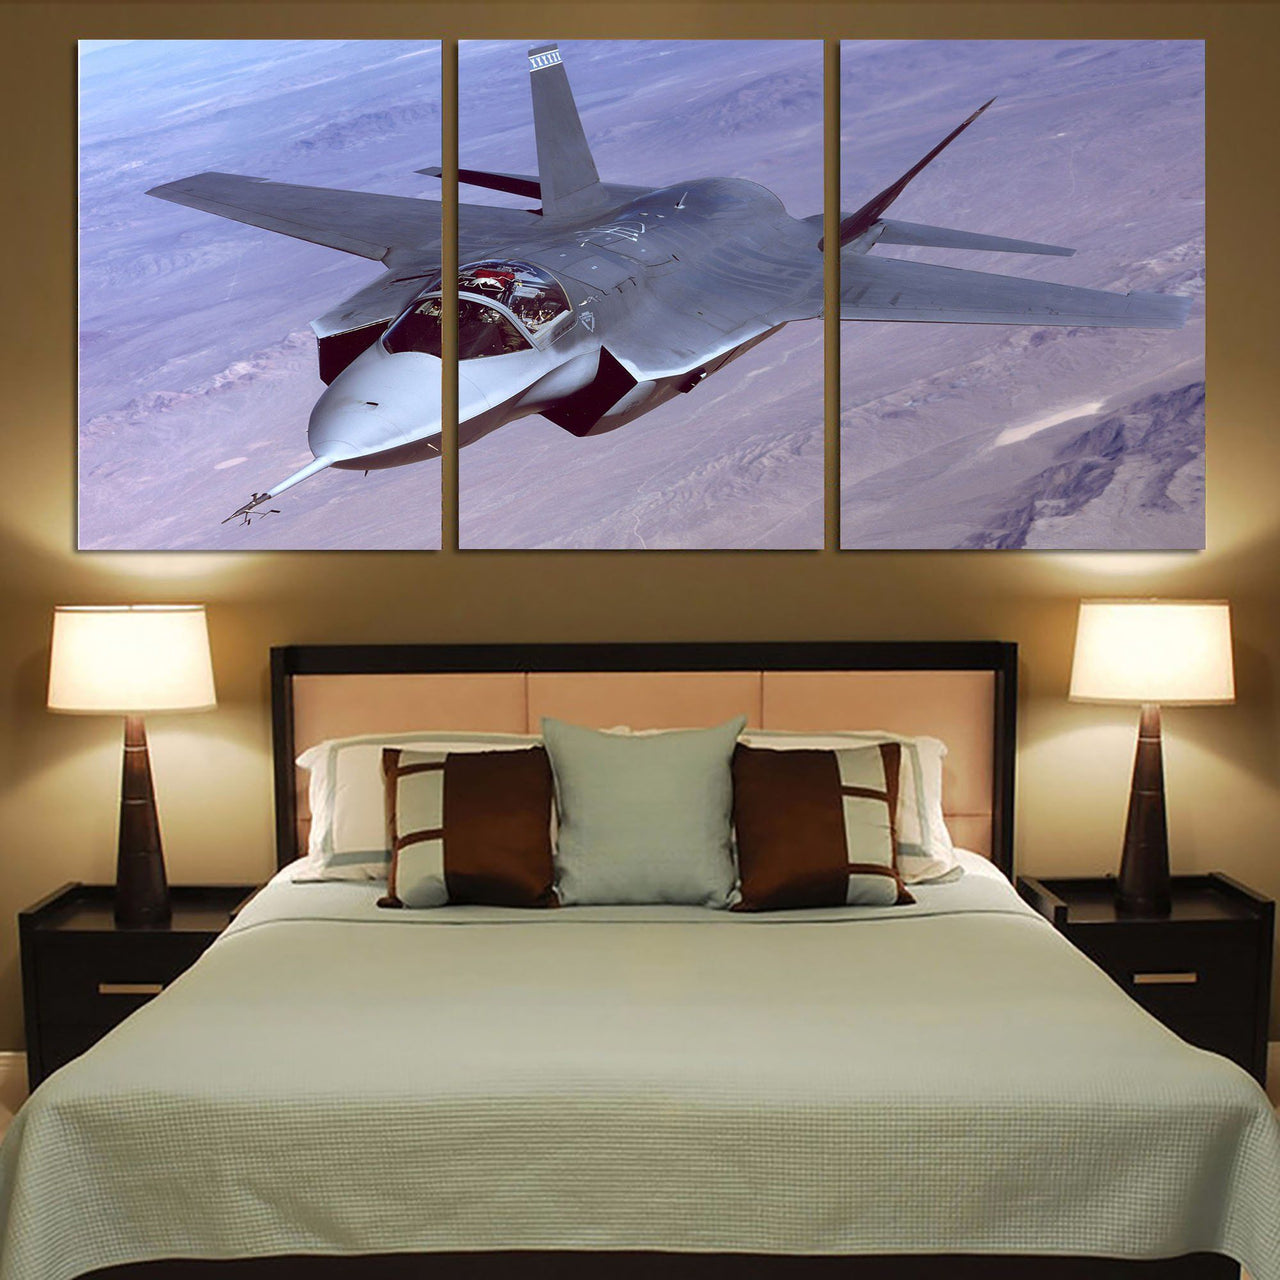 Fighting Falcon F35 Captured in the Air Printed Canvas Posters (3 Pieces) Aviation Shop 